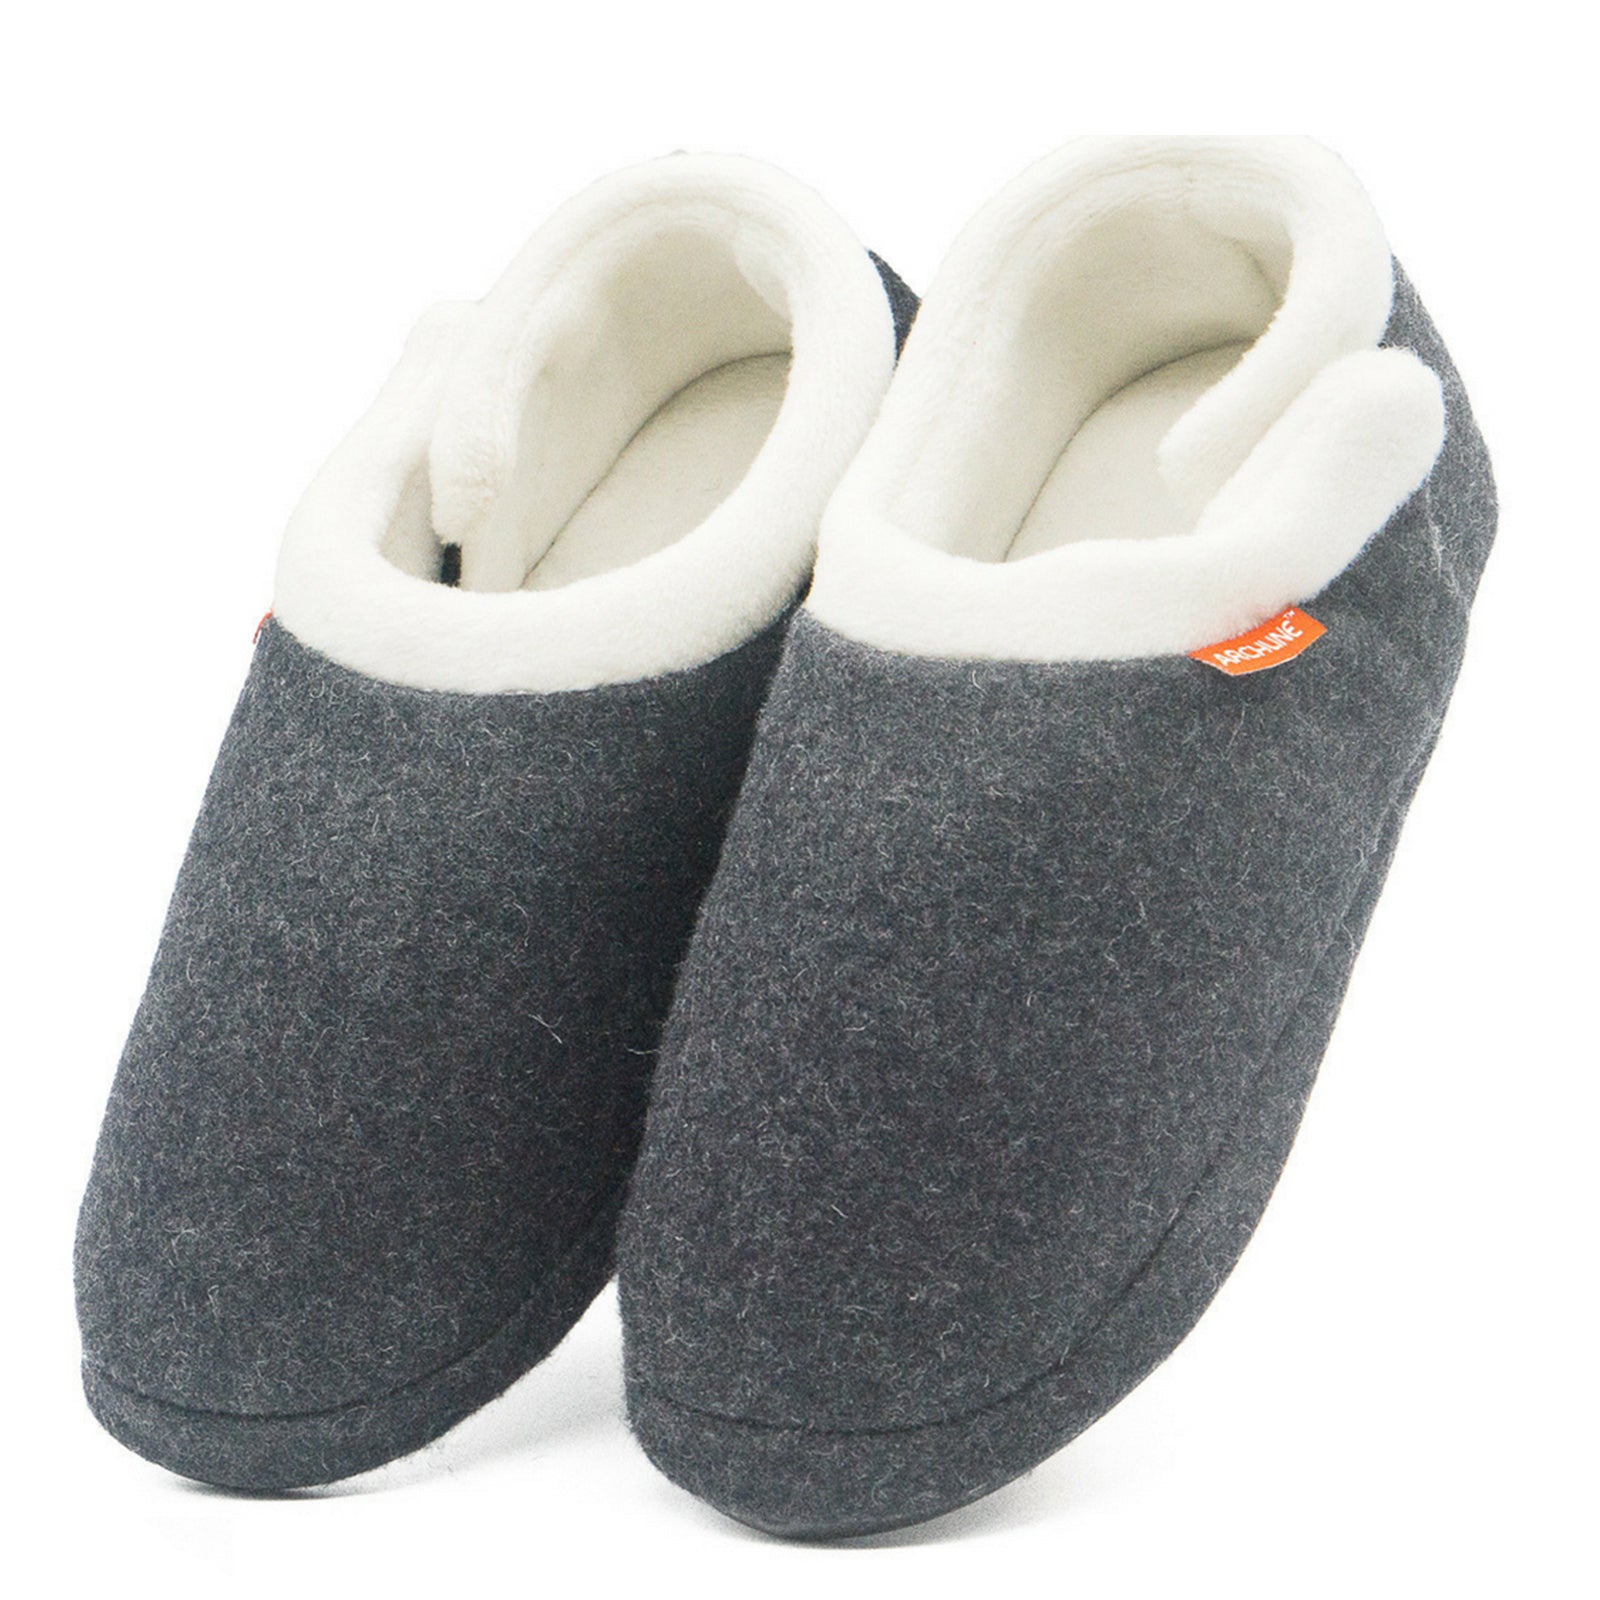 Orthotic Slippers CLOSED Arch Scuffs Orthopedic Moccasins Shoes - Grey Marle - EUR 35